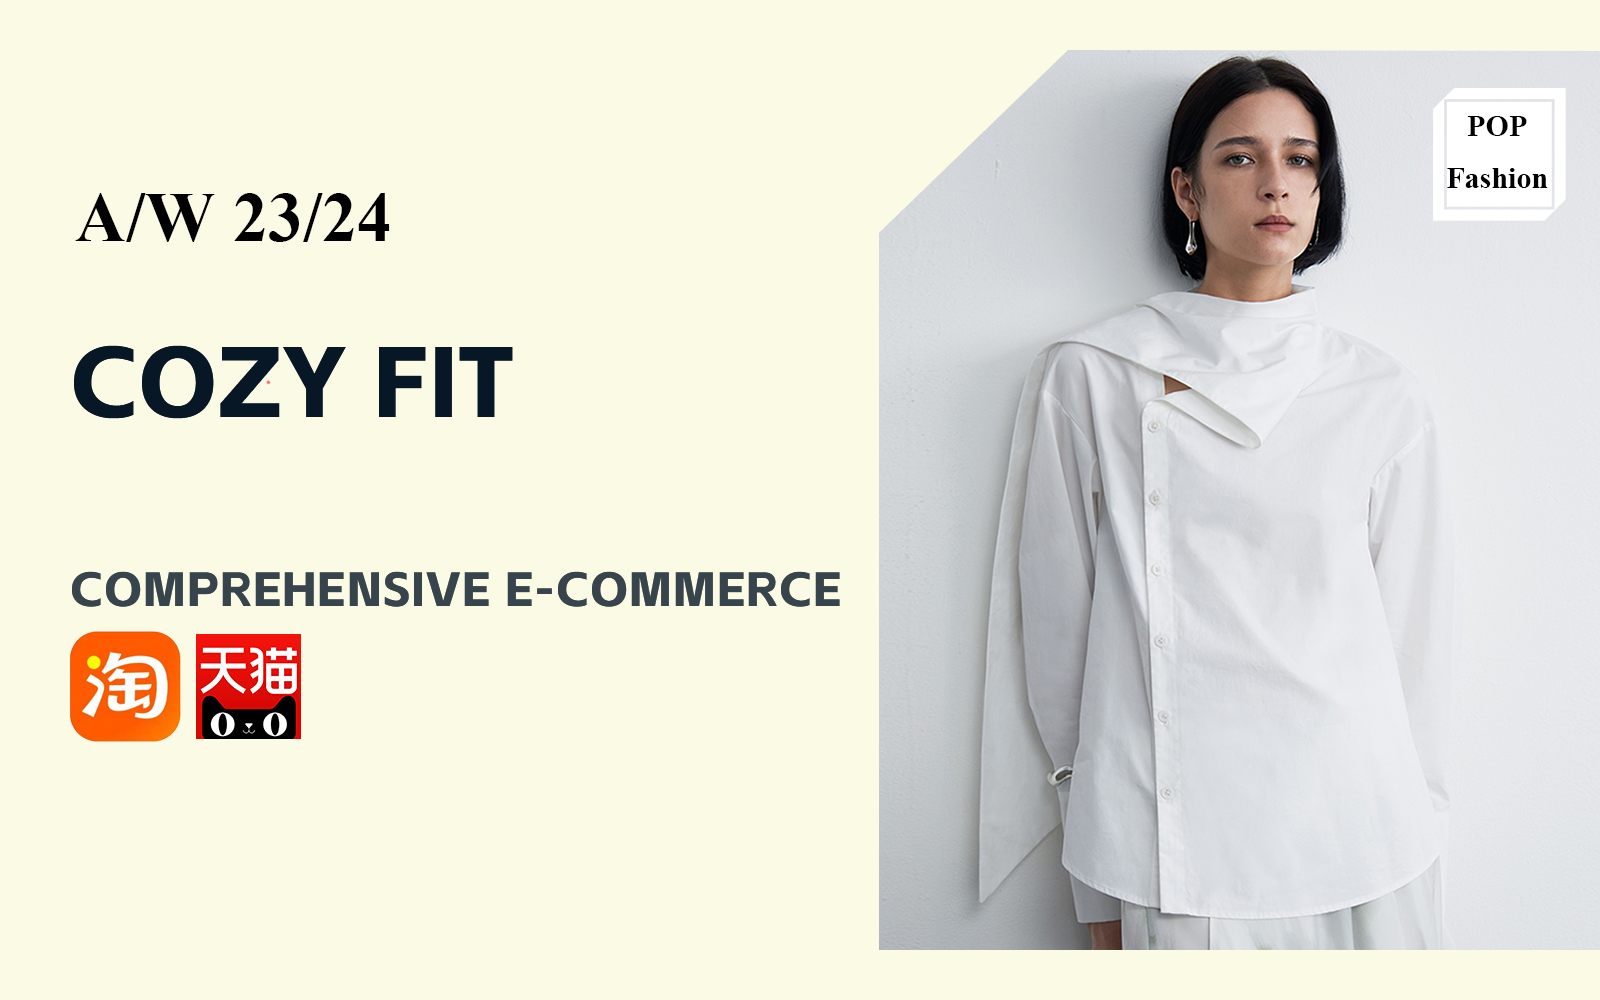 Cozy Fit -- The Popular Style of Womenswear E-Commerce